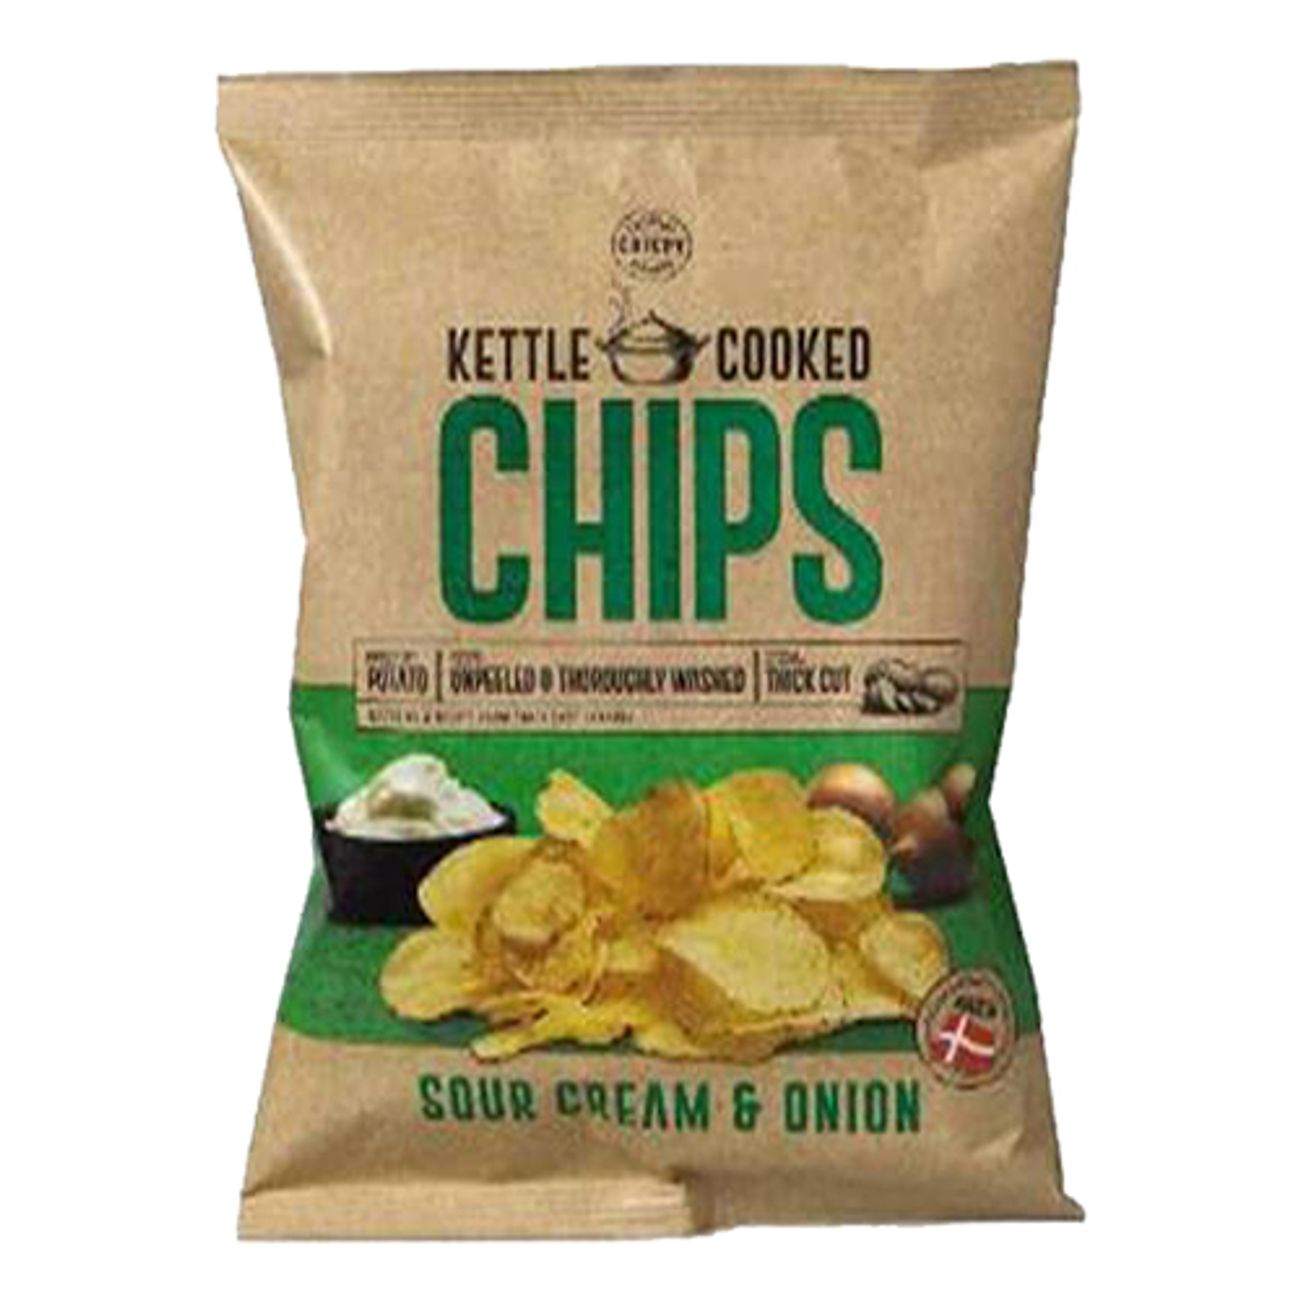 kettle-cooked-sourcream-onion-chips-2